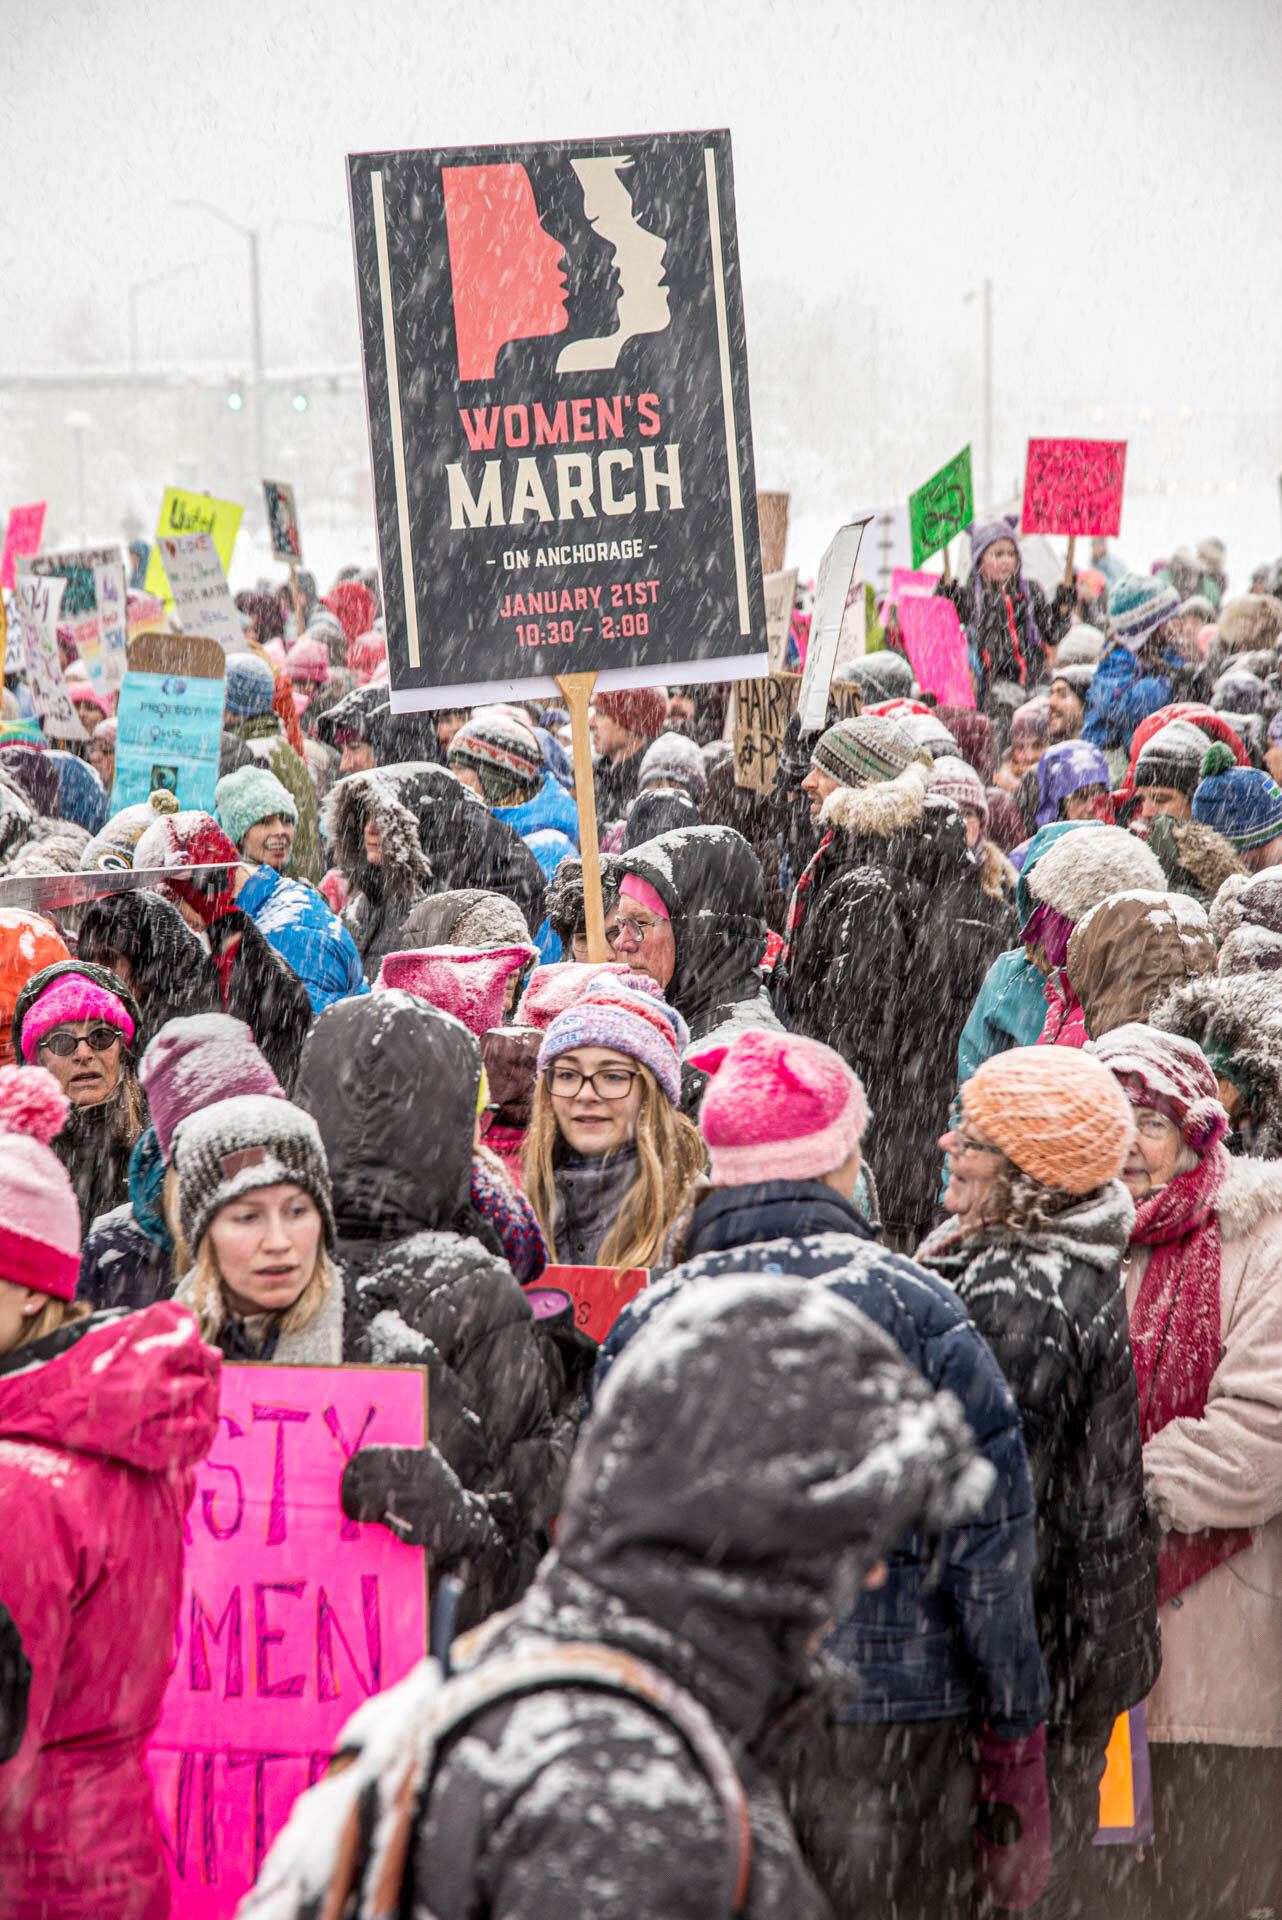 Women’s March, Inauguration Day, Anchorage, AK, 2017